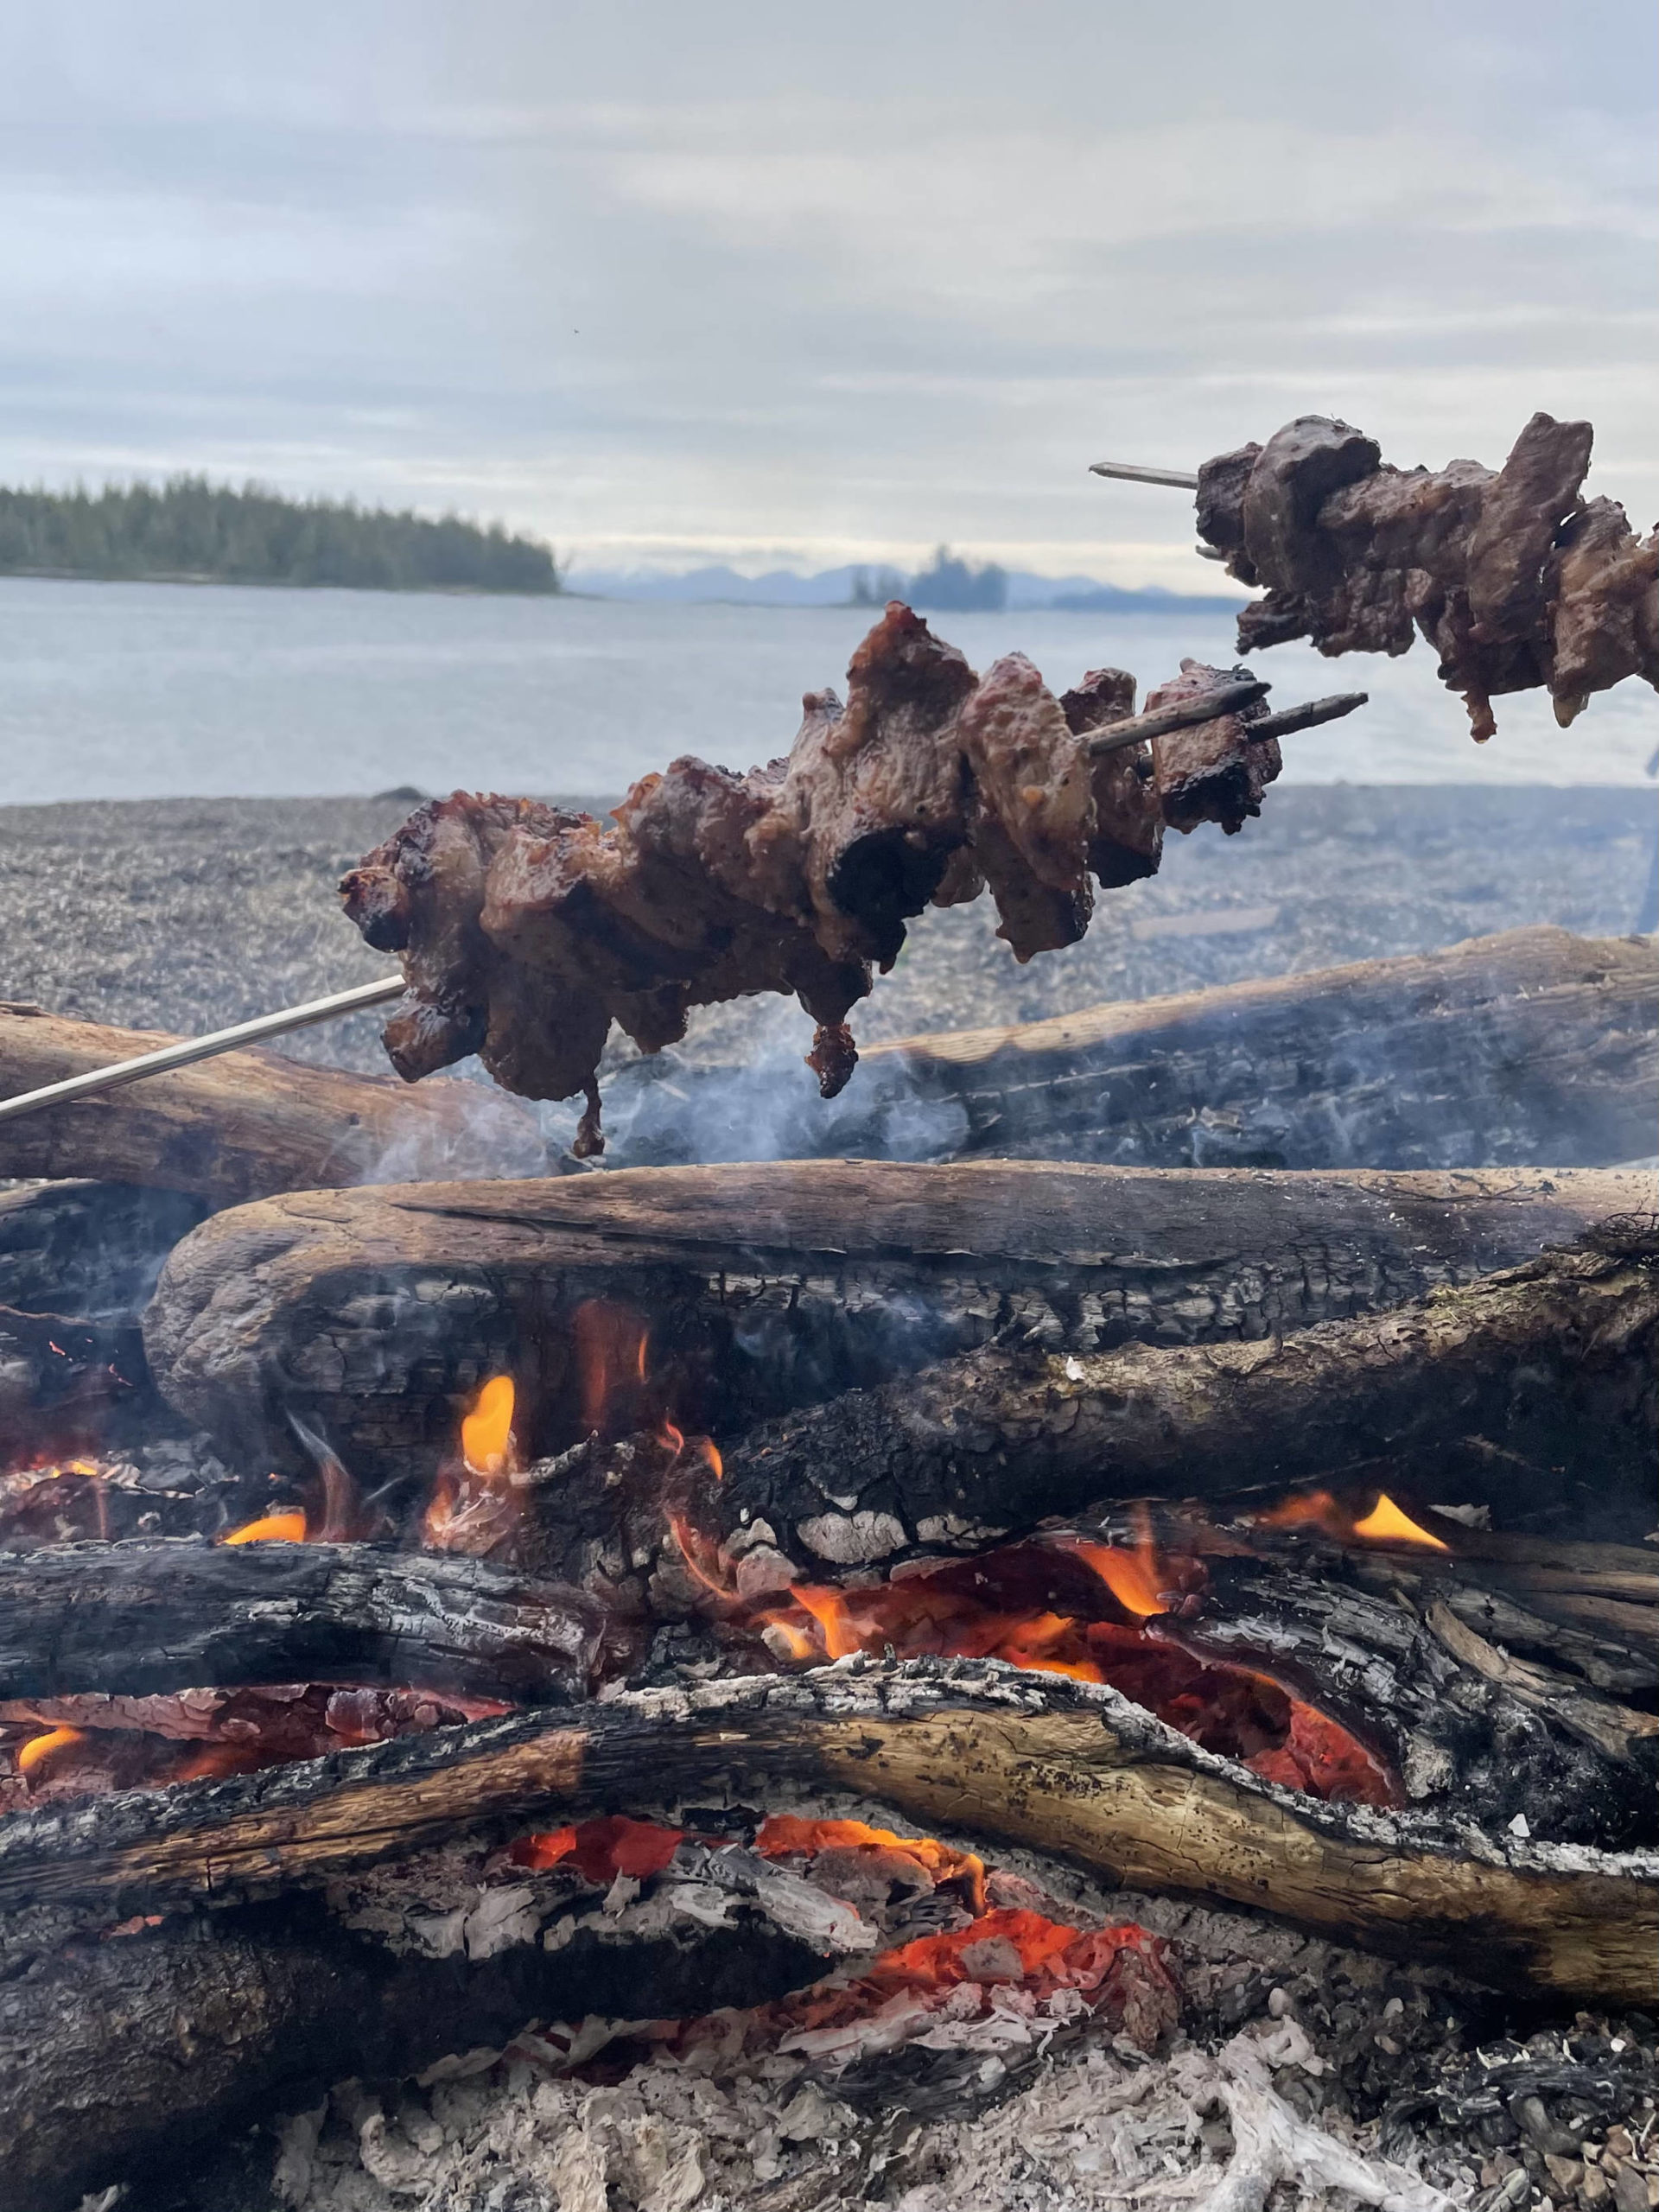 The author cooks steak over a beach fire over the Memorial Day weekend. (Jeff Lund / For the Juneau Empire)